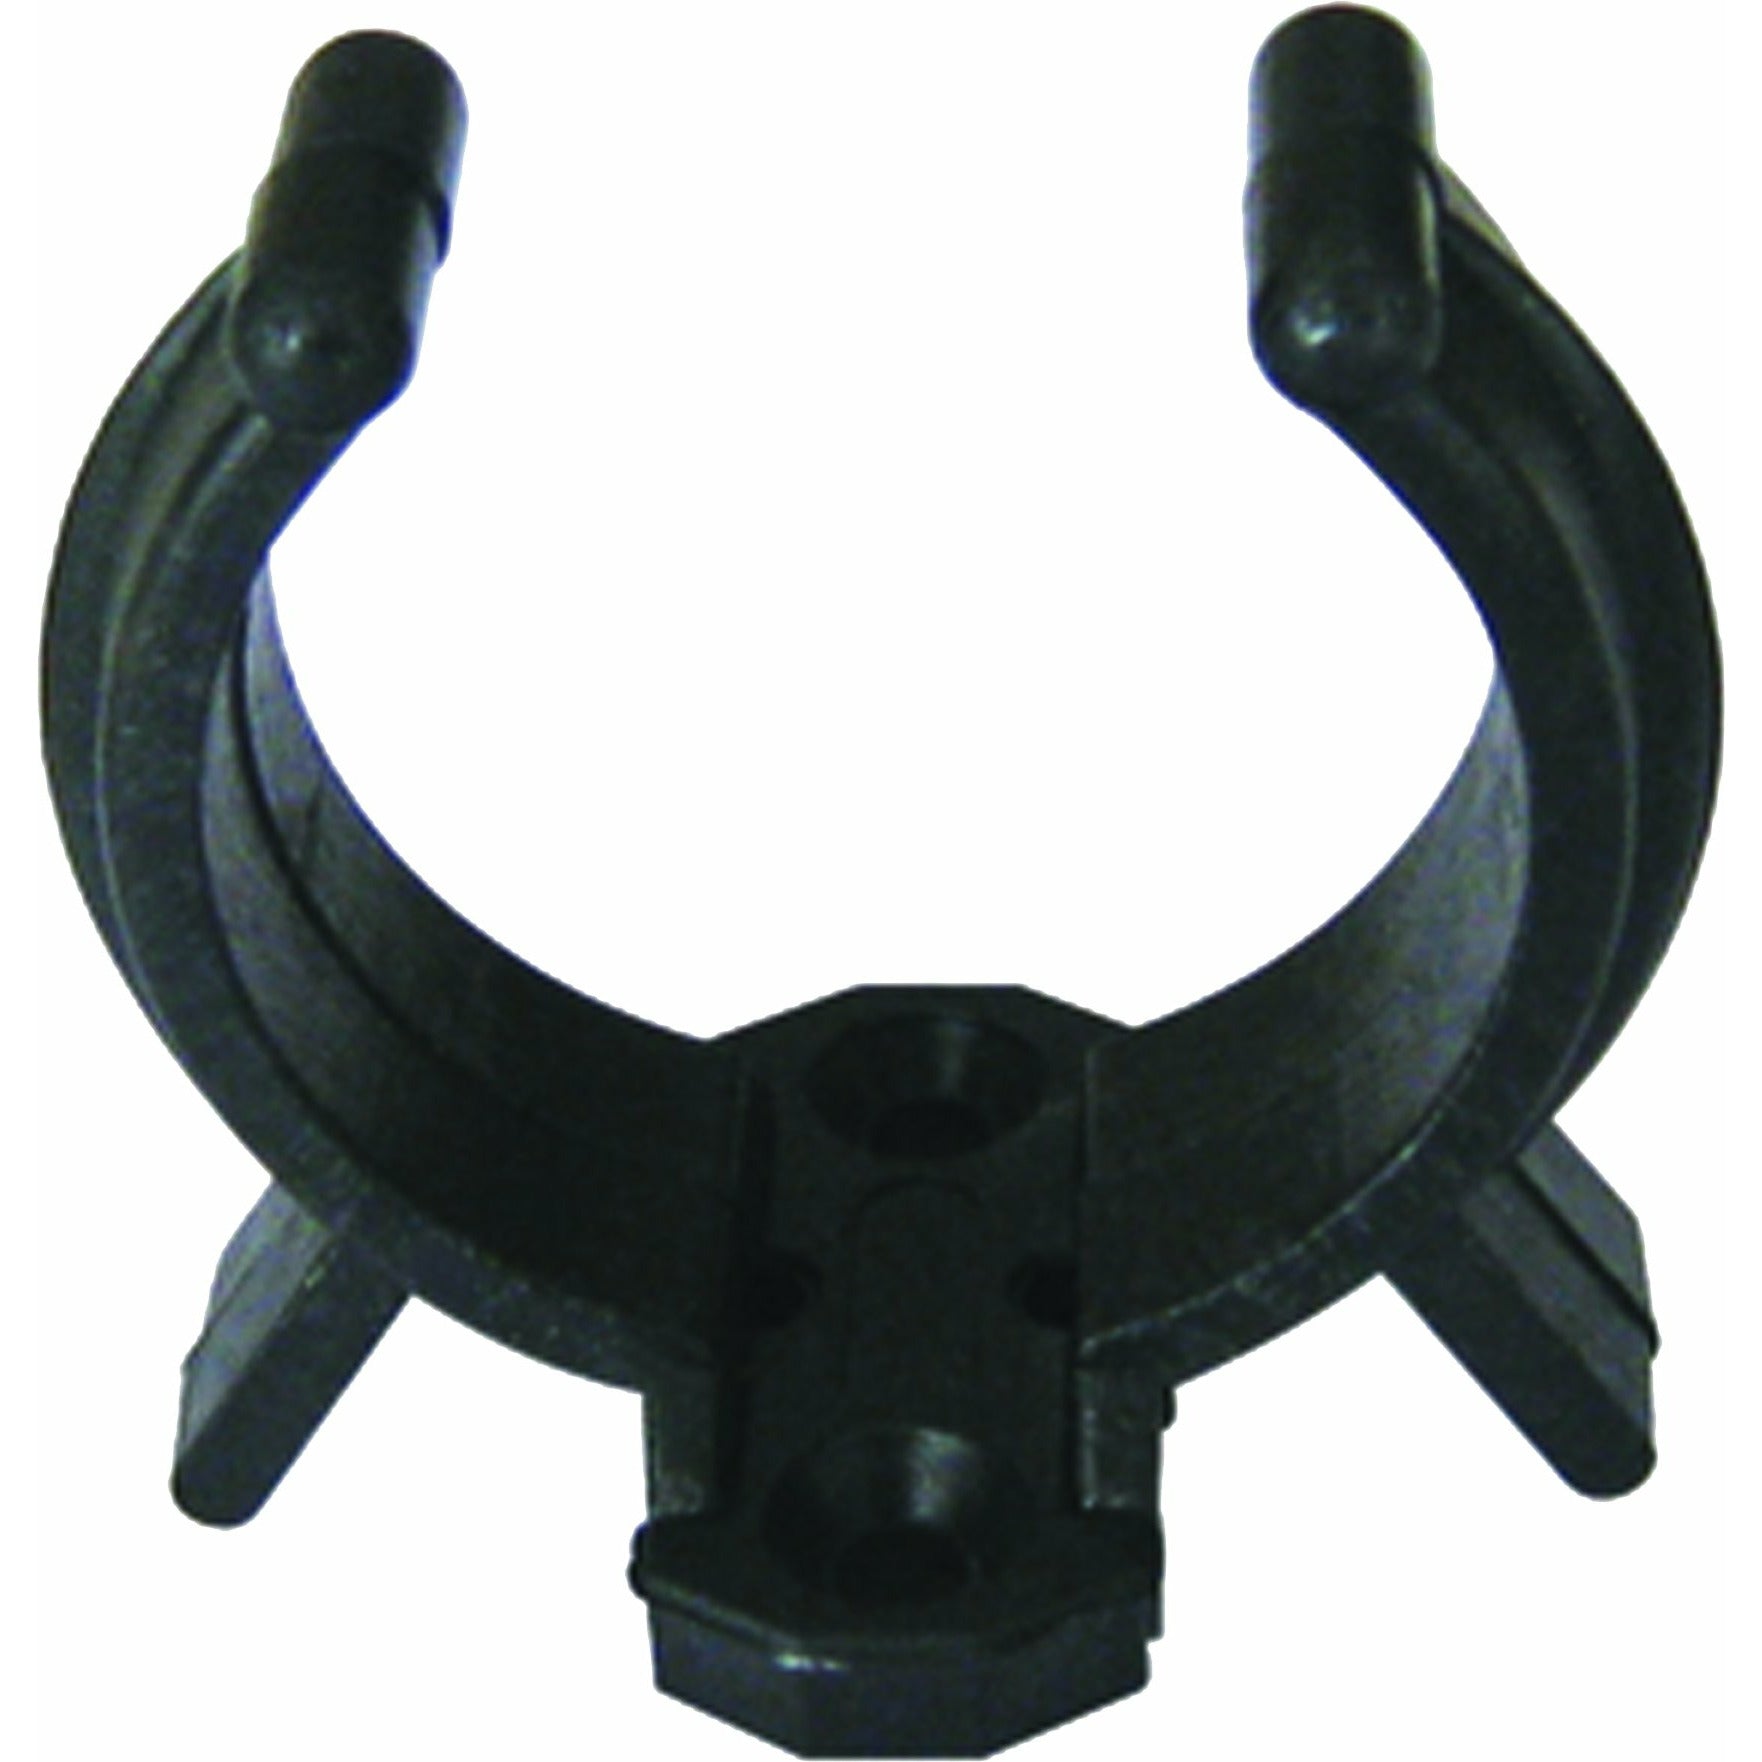 Talamex Clip Holders For Oars Black 34-45MM (2) 25227063